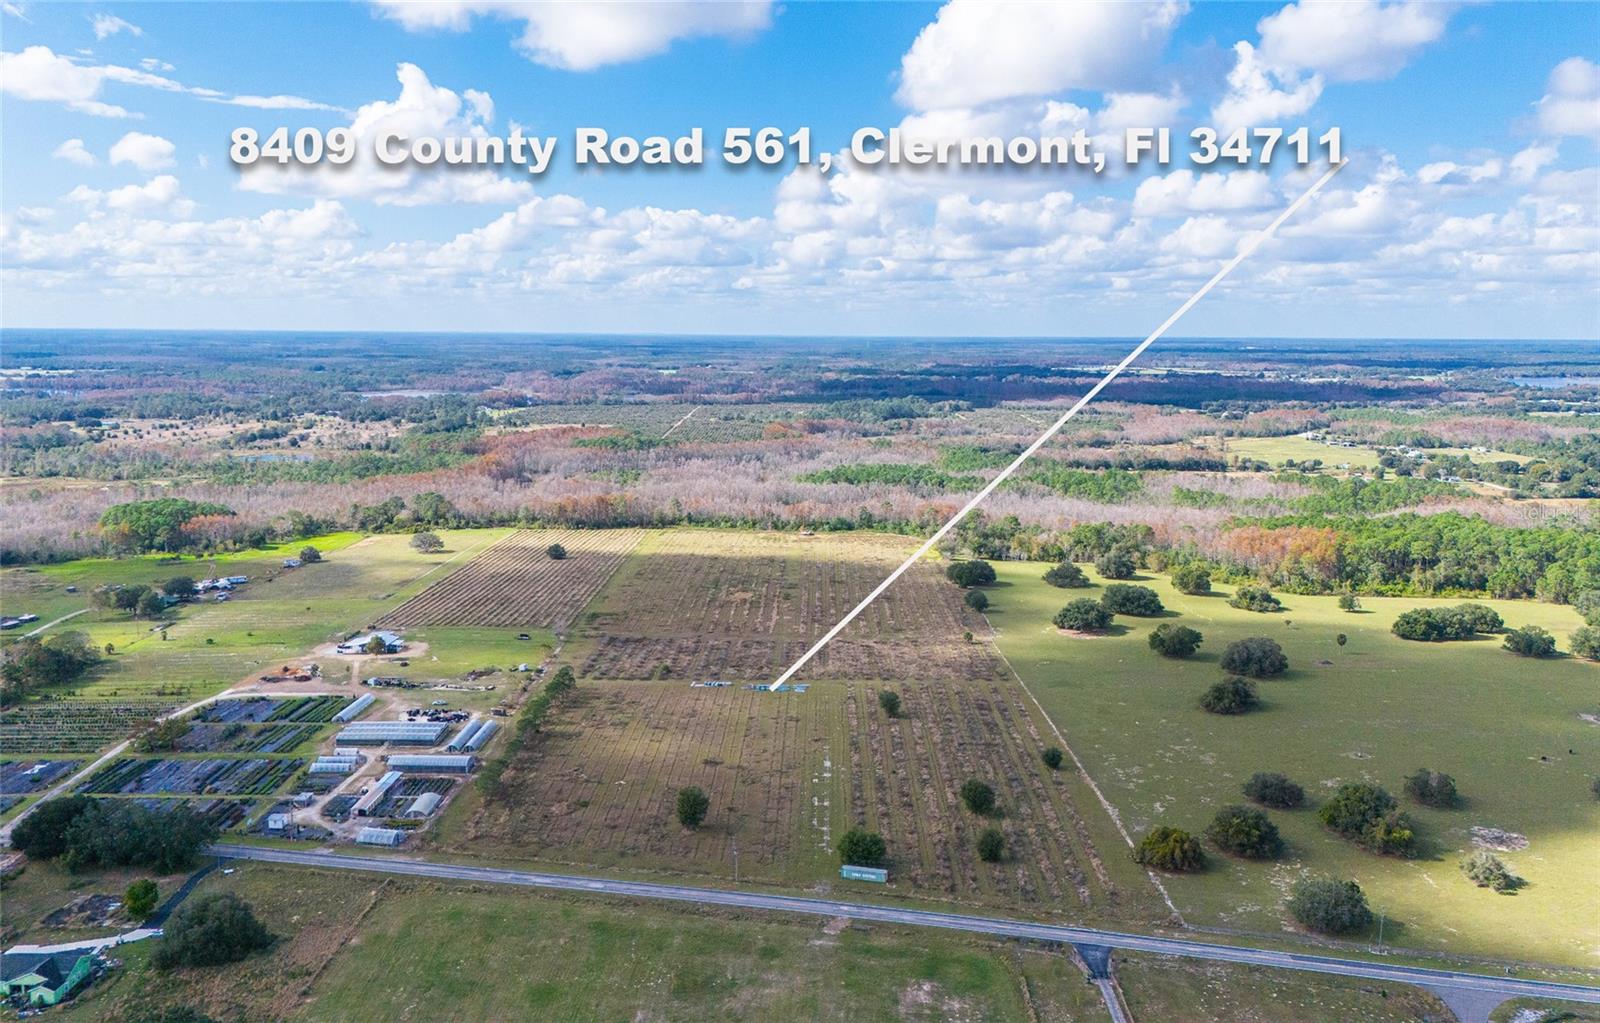 Details for County Road 561, CLERMONT, FL 34711